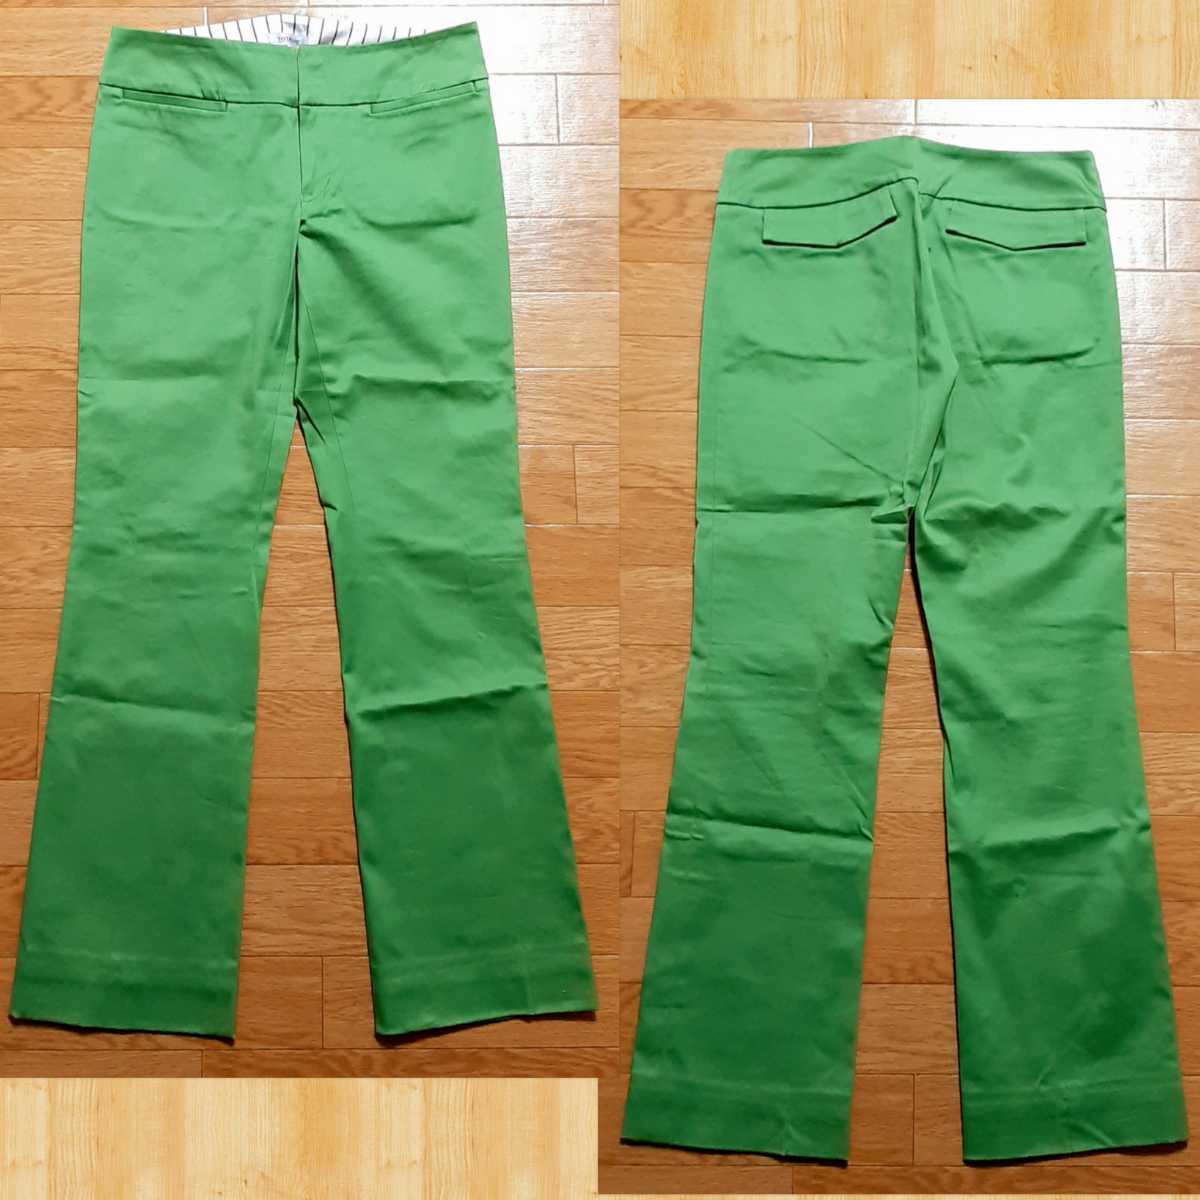  regular price 17000 jpy TOTALITEto-talite stretch color pants 38 Bay cruise 